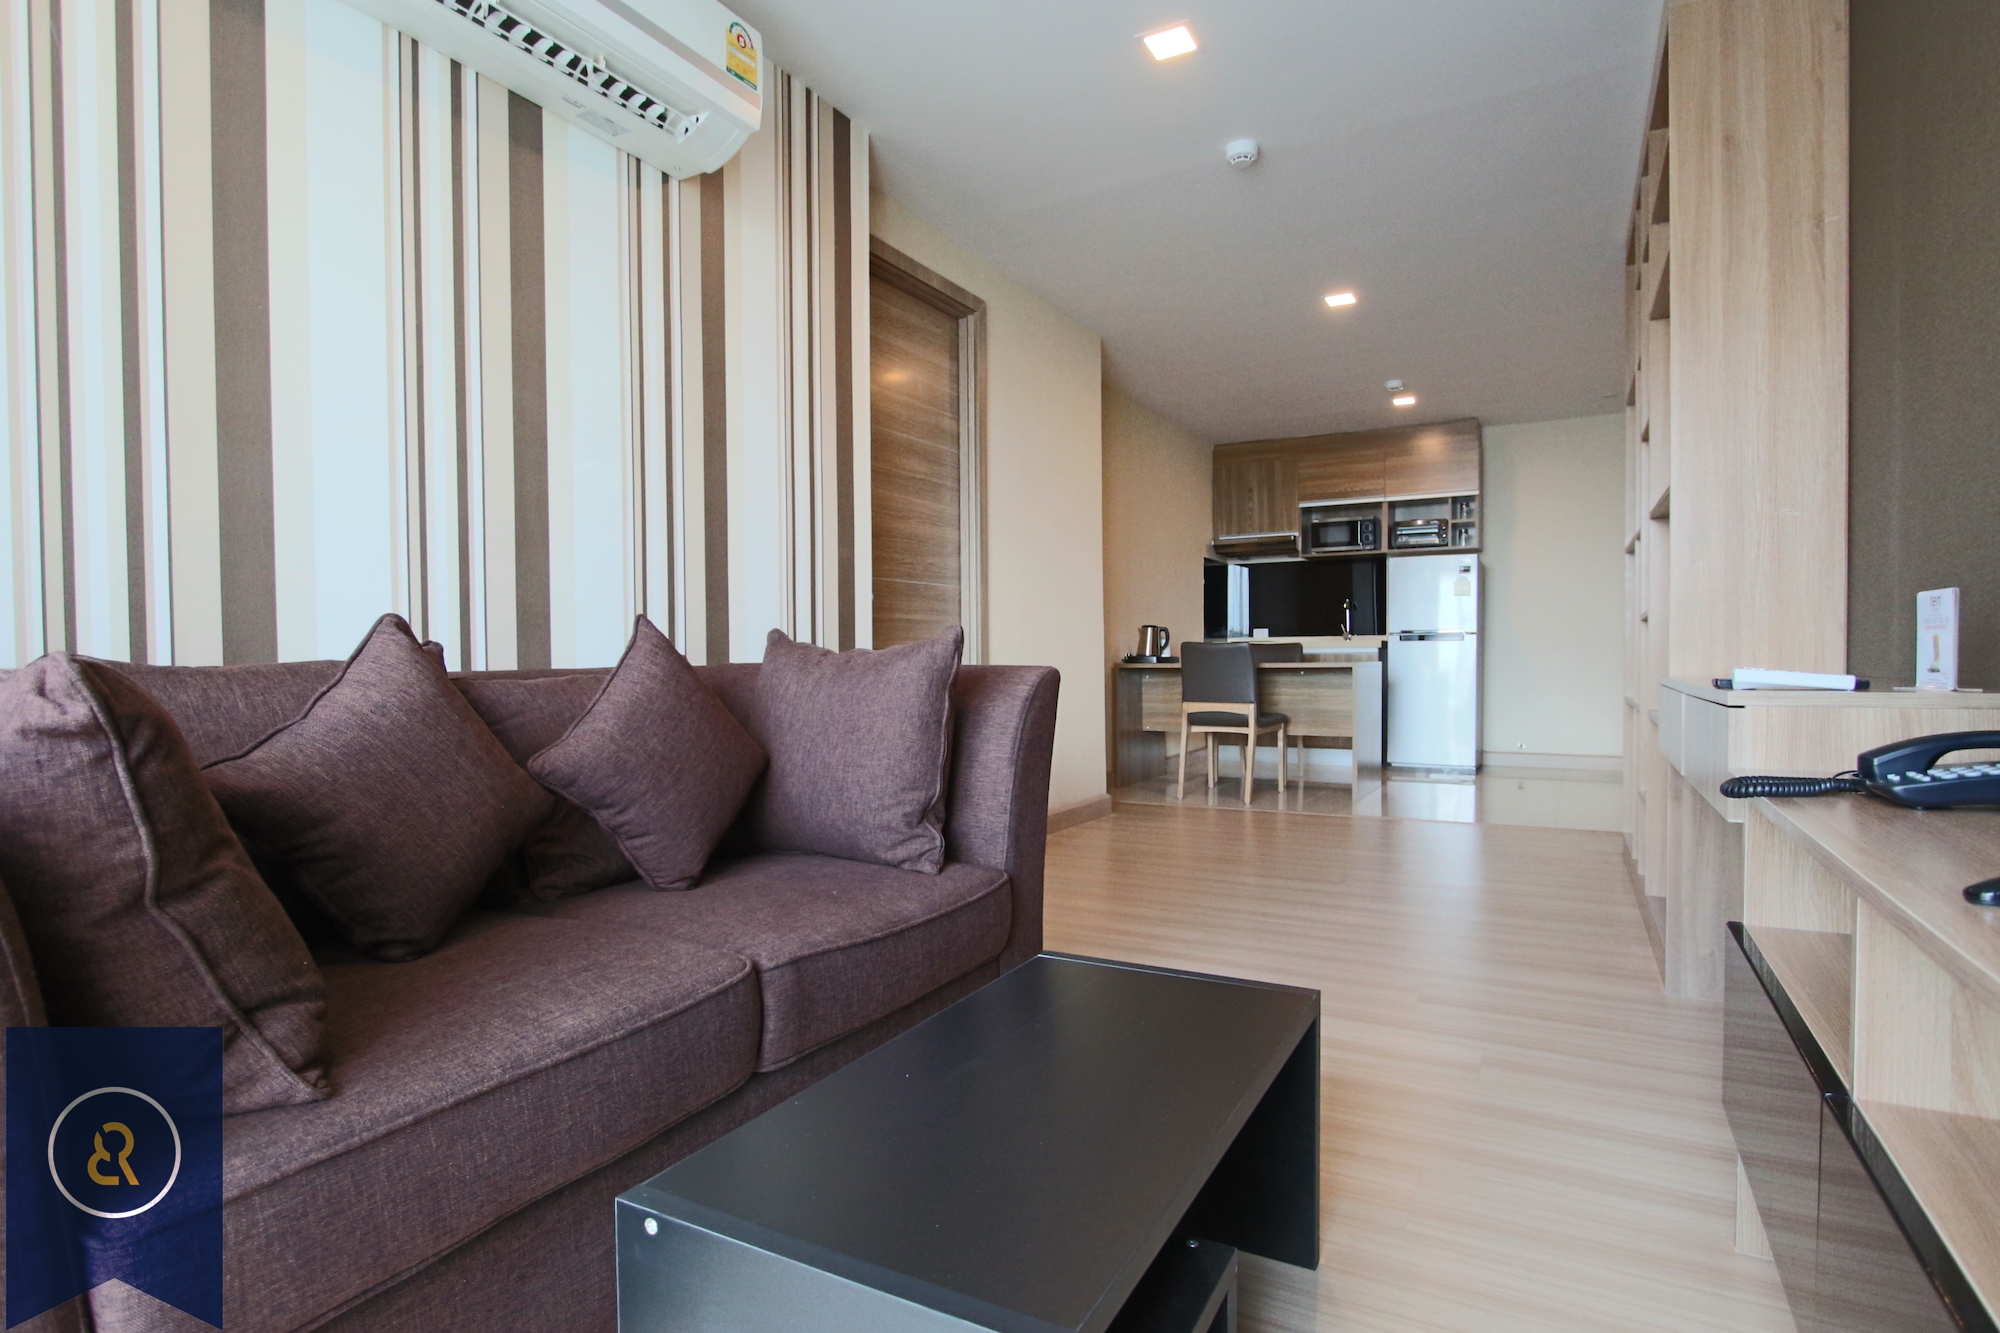 CITY SMART One Bedroom Apartment for Rent in Ekkamai - Bowery and ...